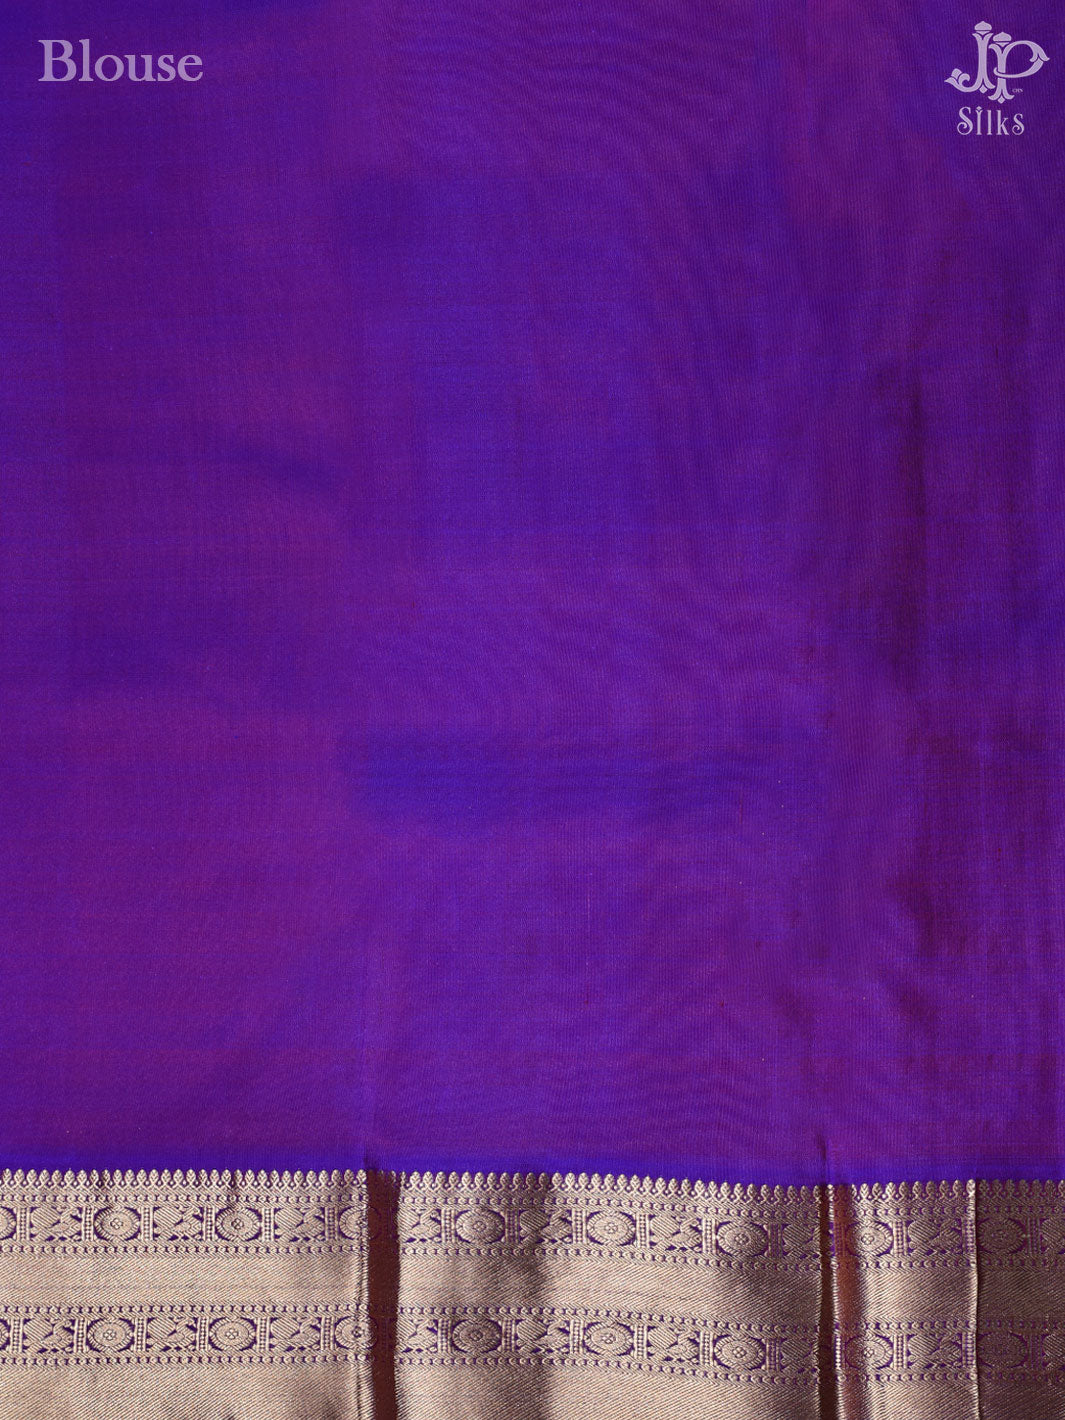 Dual Shade of Blue and Purple Pure Silk Saree - D4129 - View 4